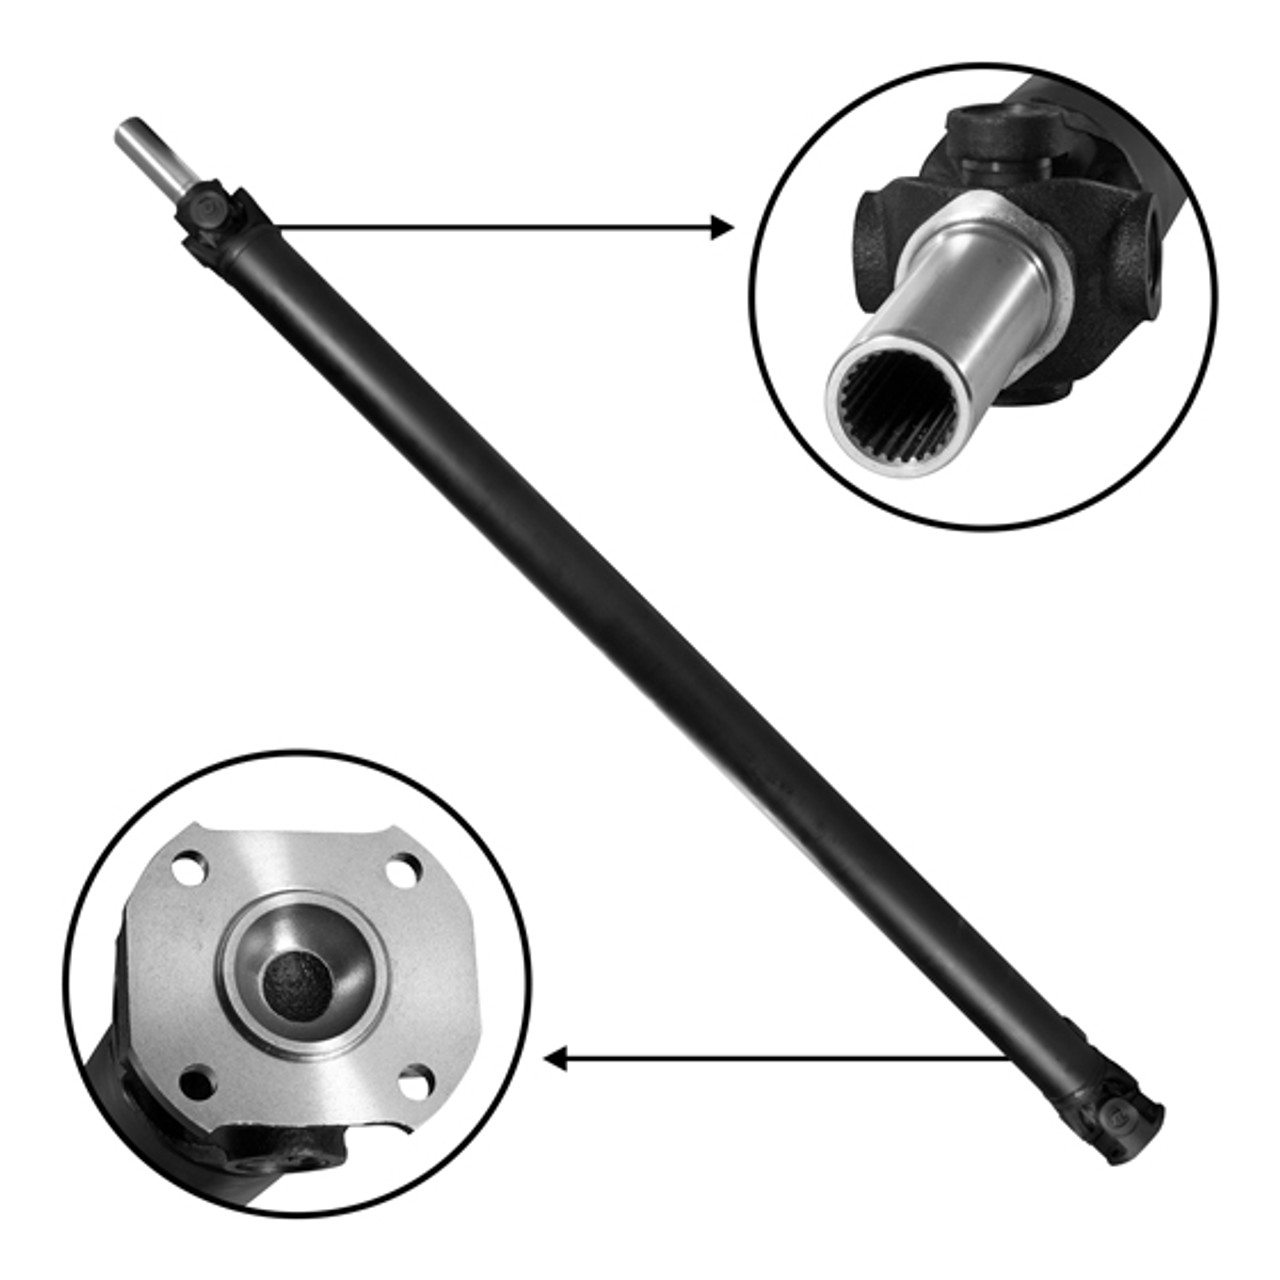 NEW USA Standard Rear Driveshaft for Toyota 4 Runner, 3.4L V6, 2WD, A/T, 1 Piece, 60.75" Overall length